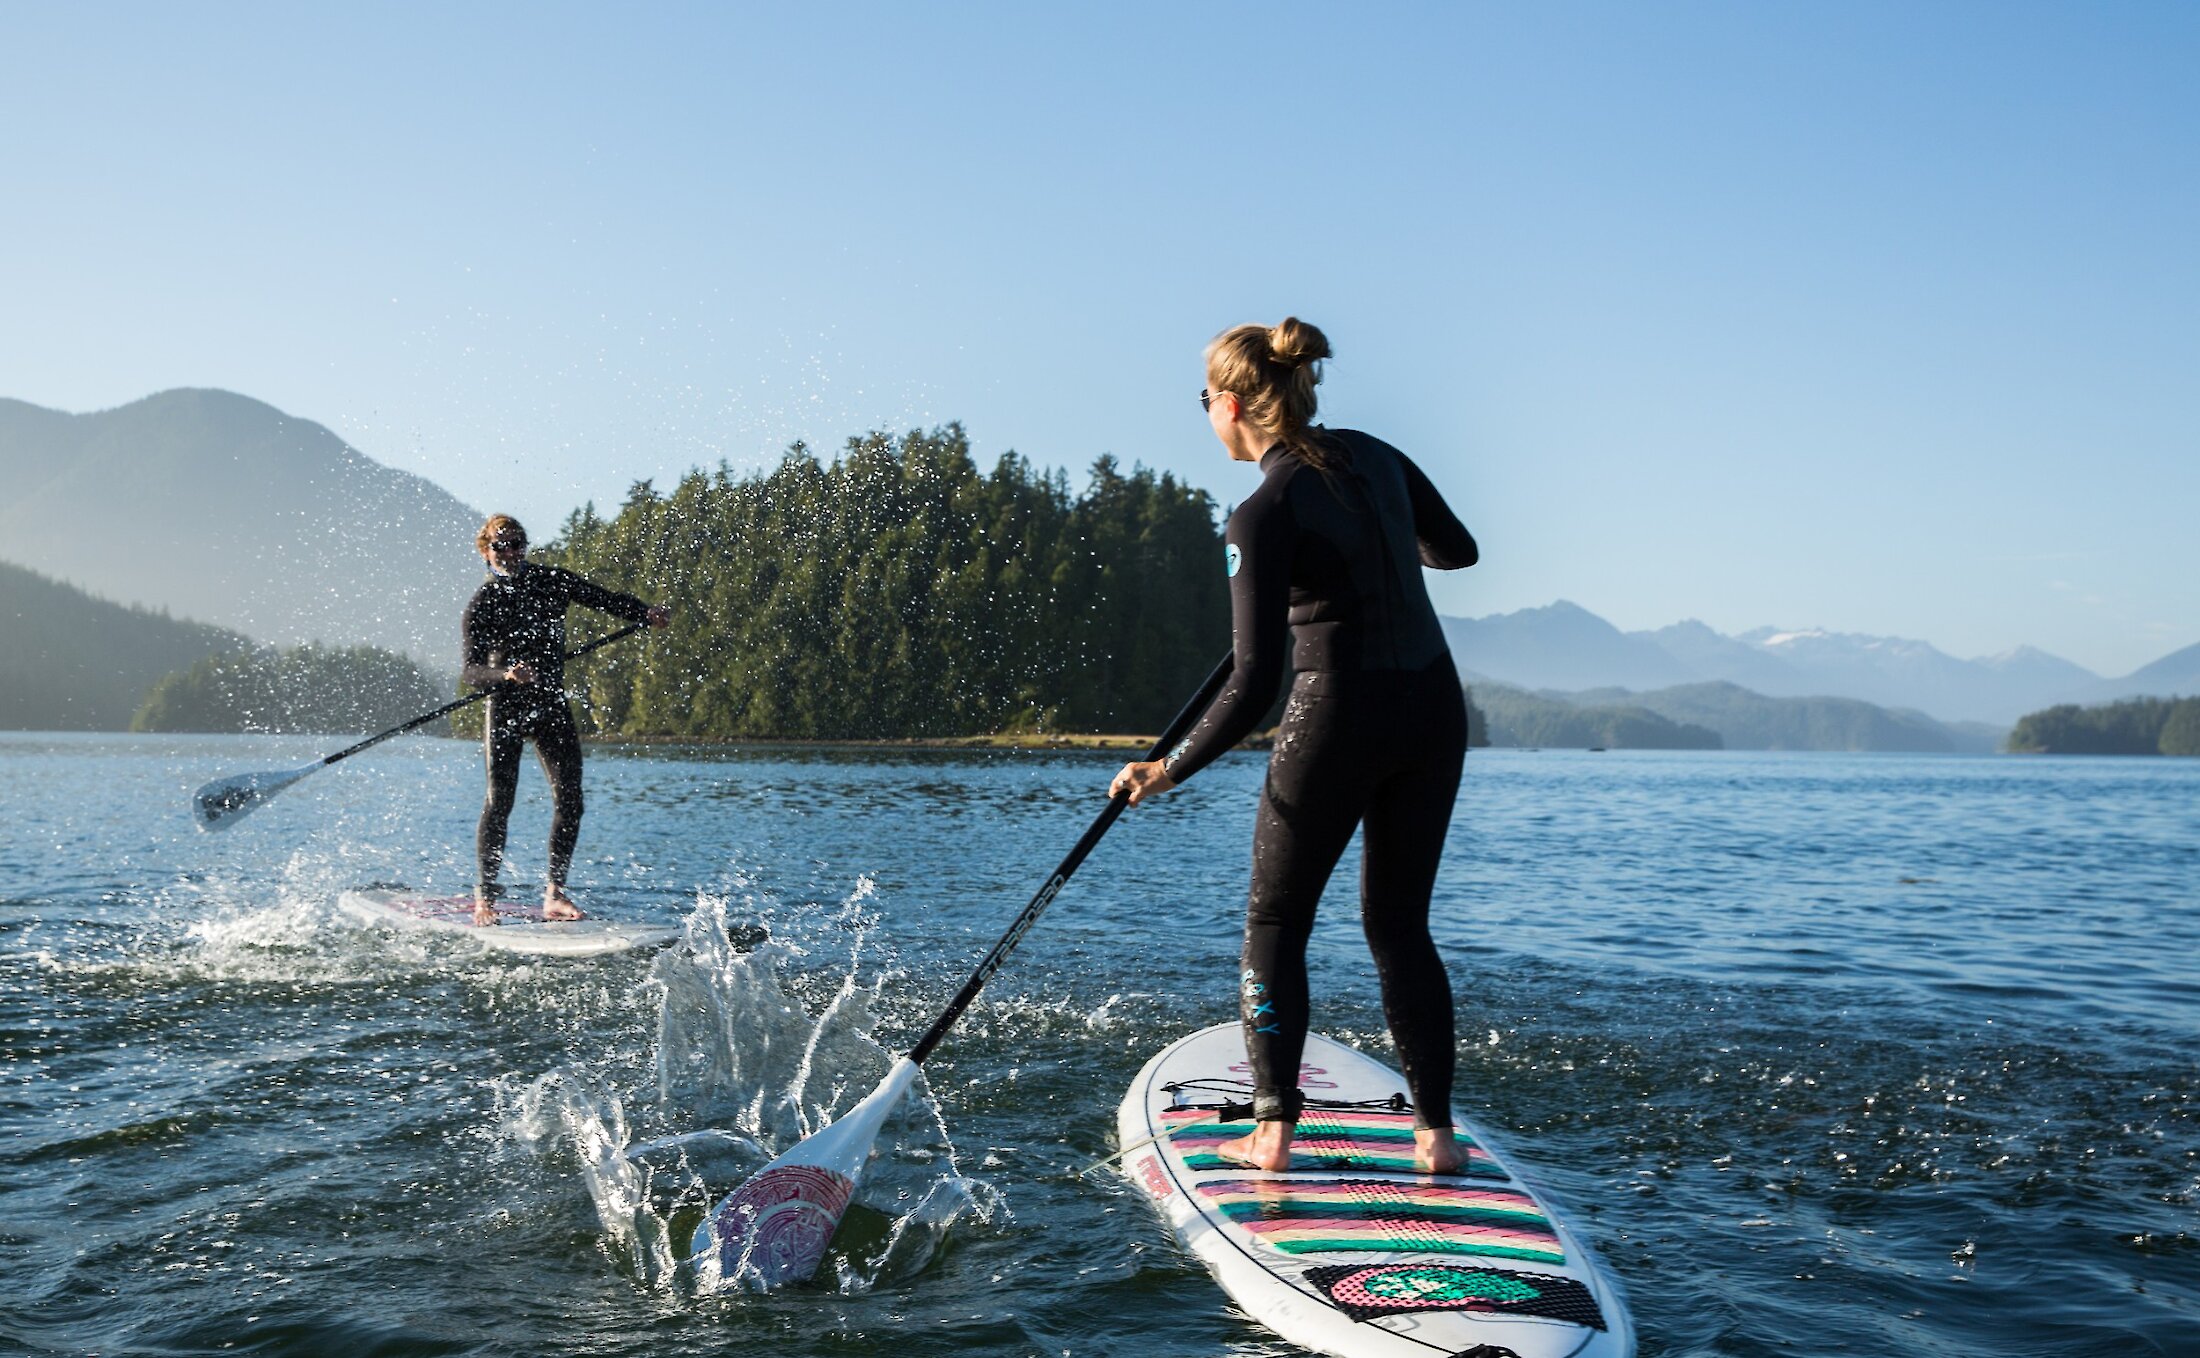 woman and man in wetsuits on paddleboards and splashing water at each other